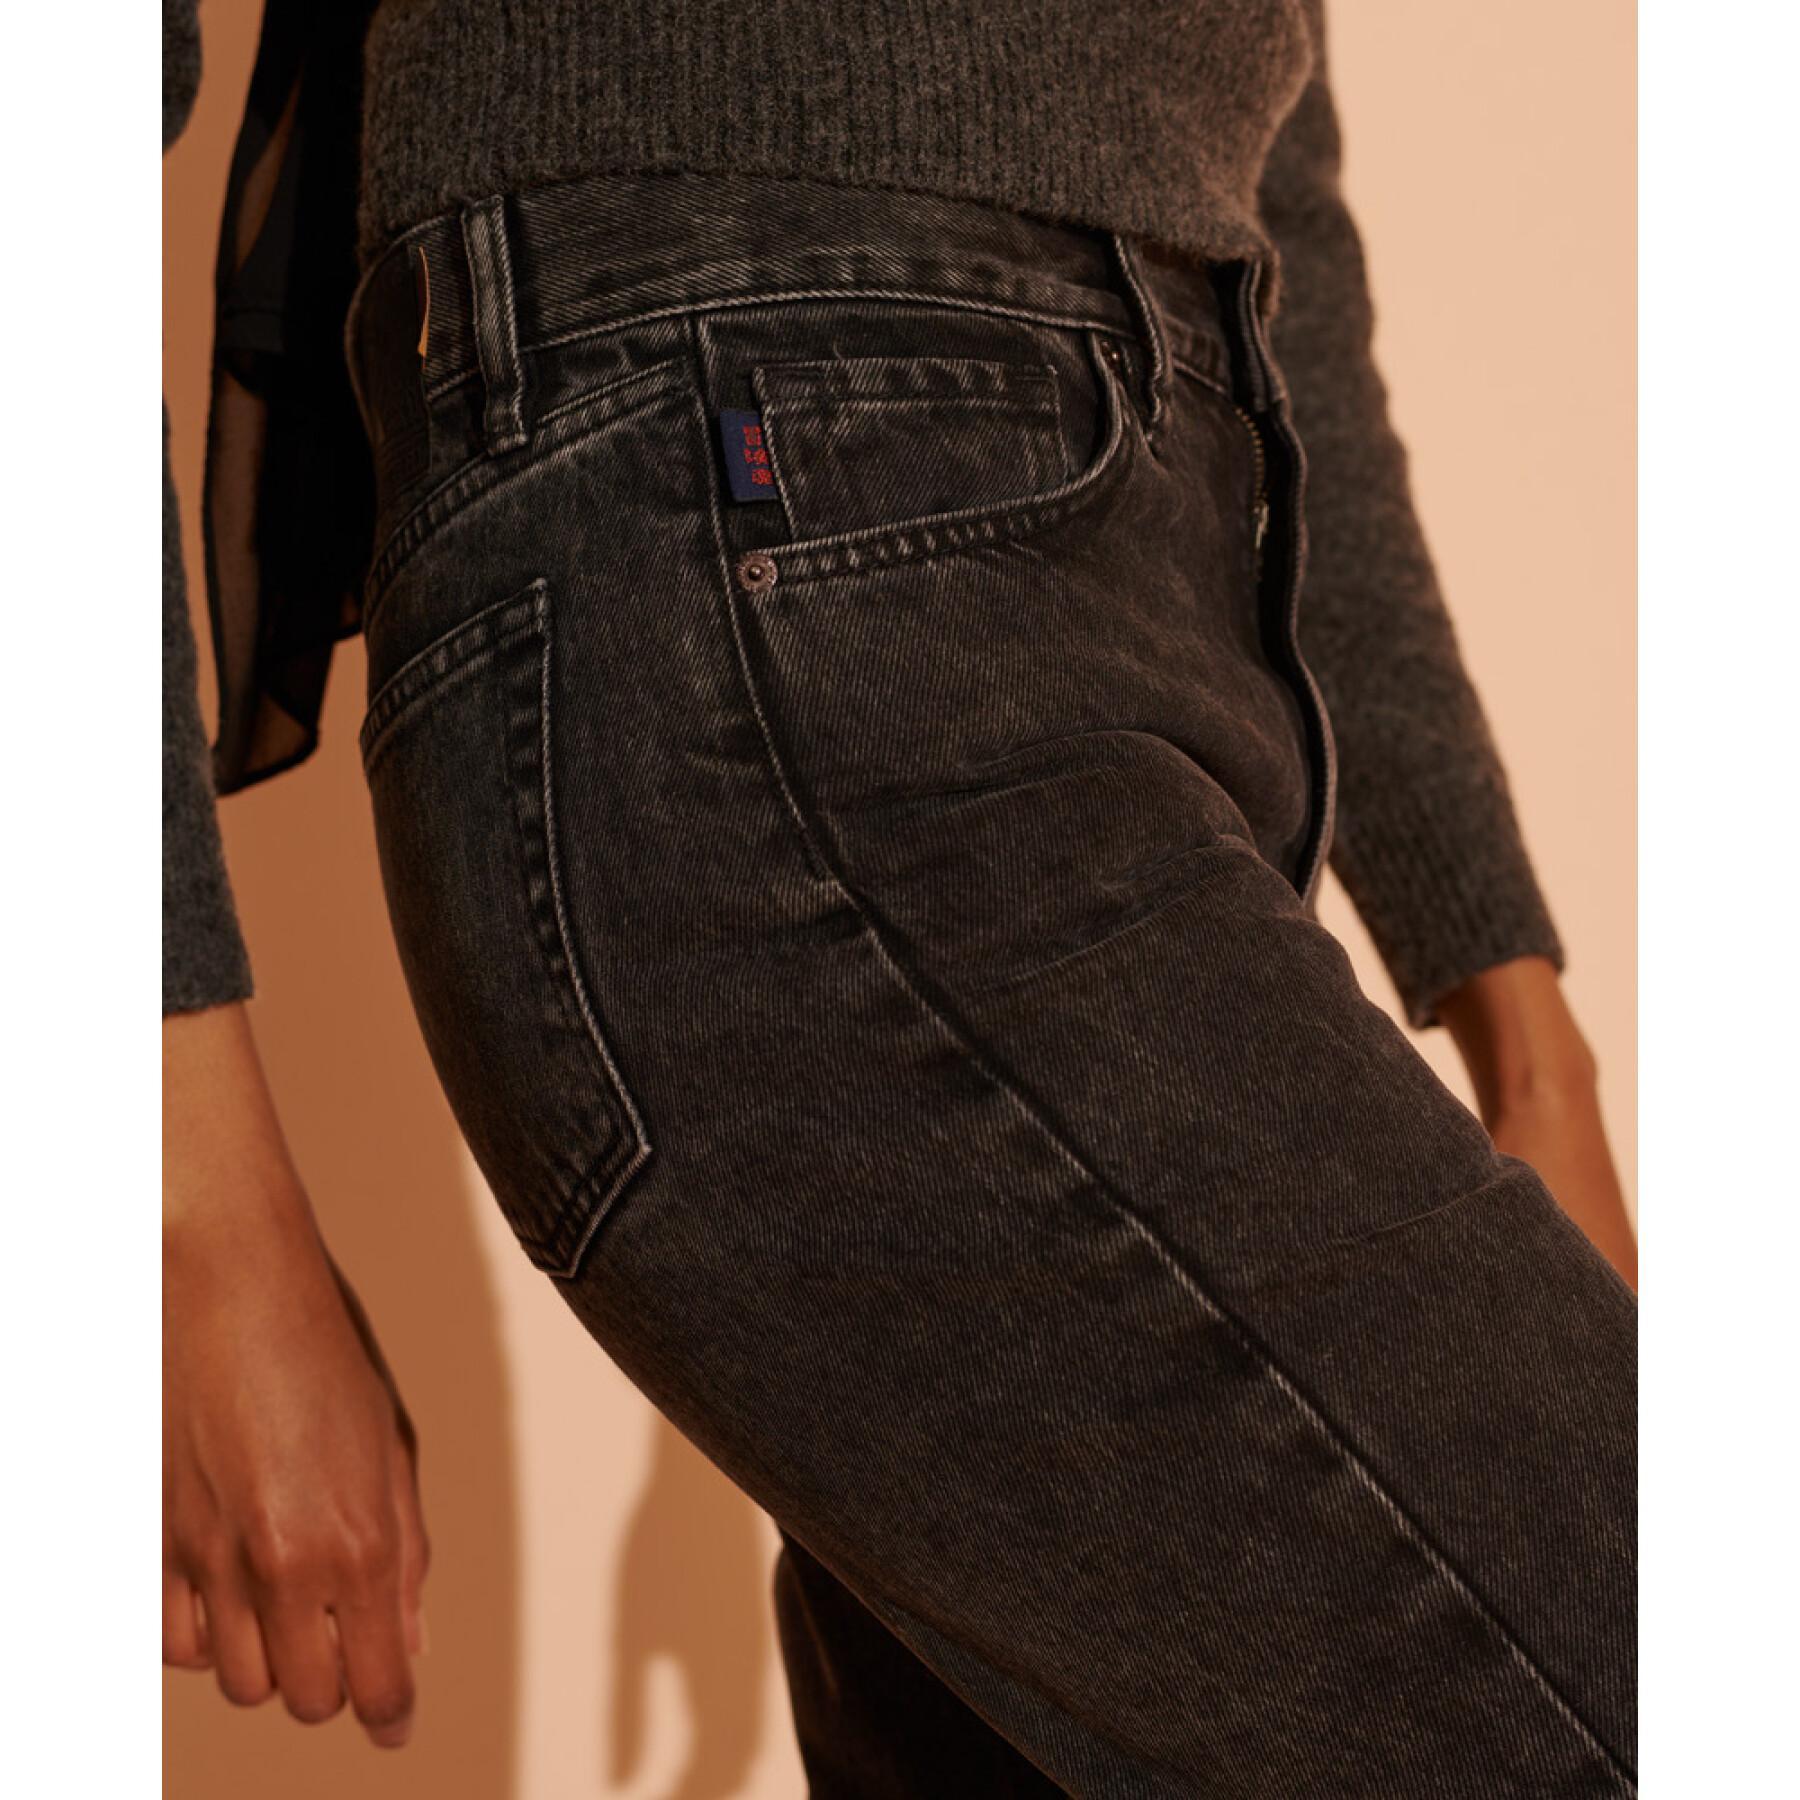 Gerade Damenjeans mit hoher Taille Superdry